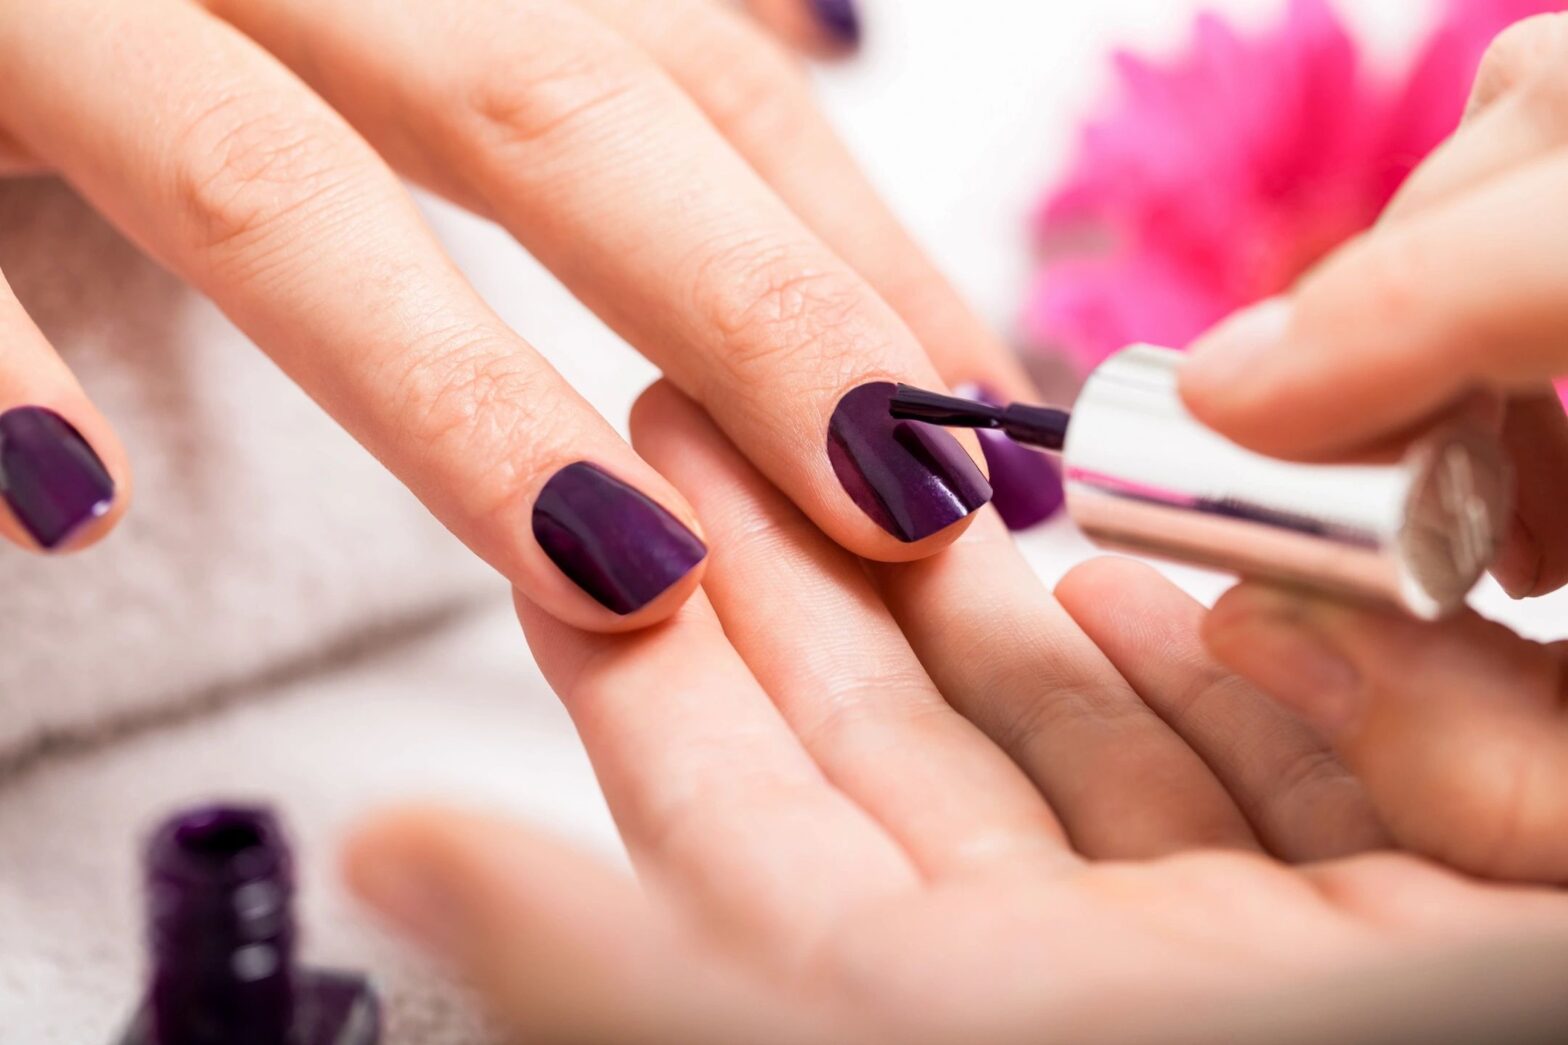 How to keep your fingernails cared for and protected